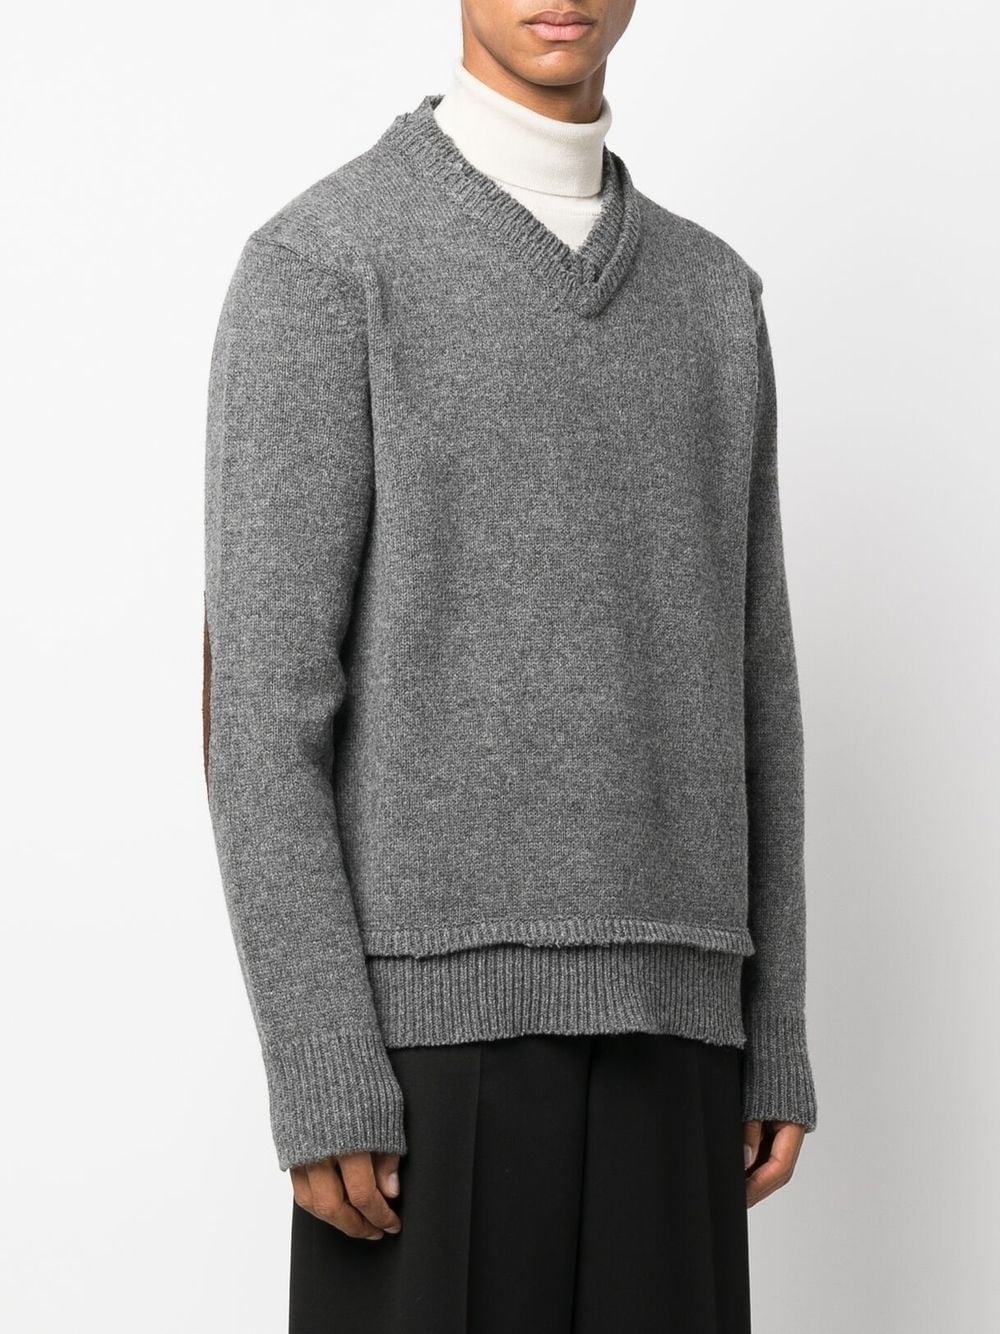 Elbow-patch jumper